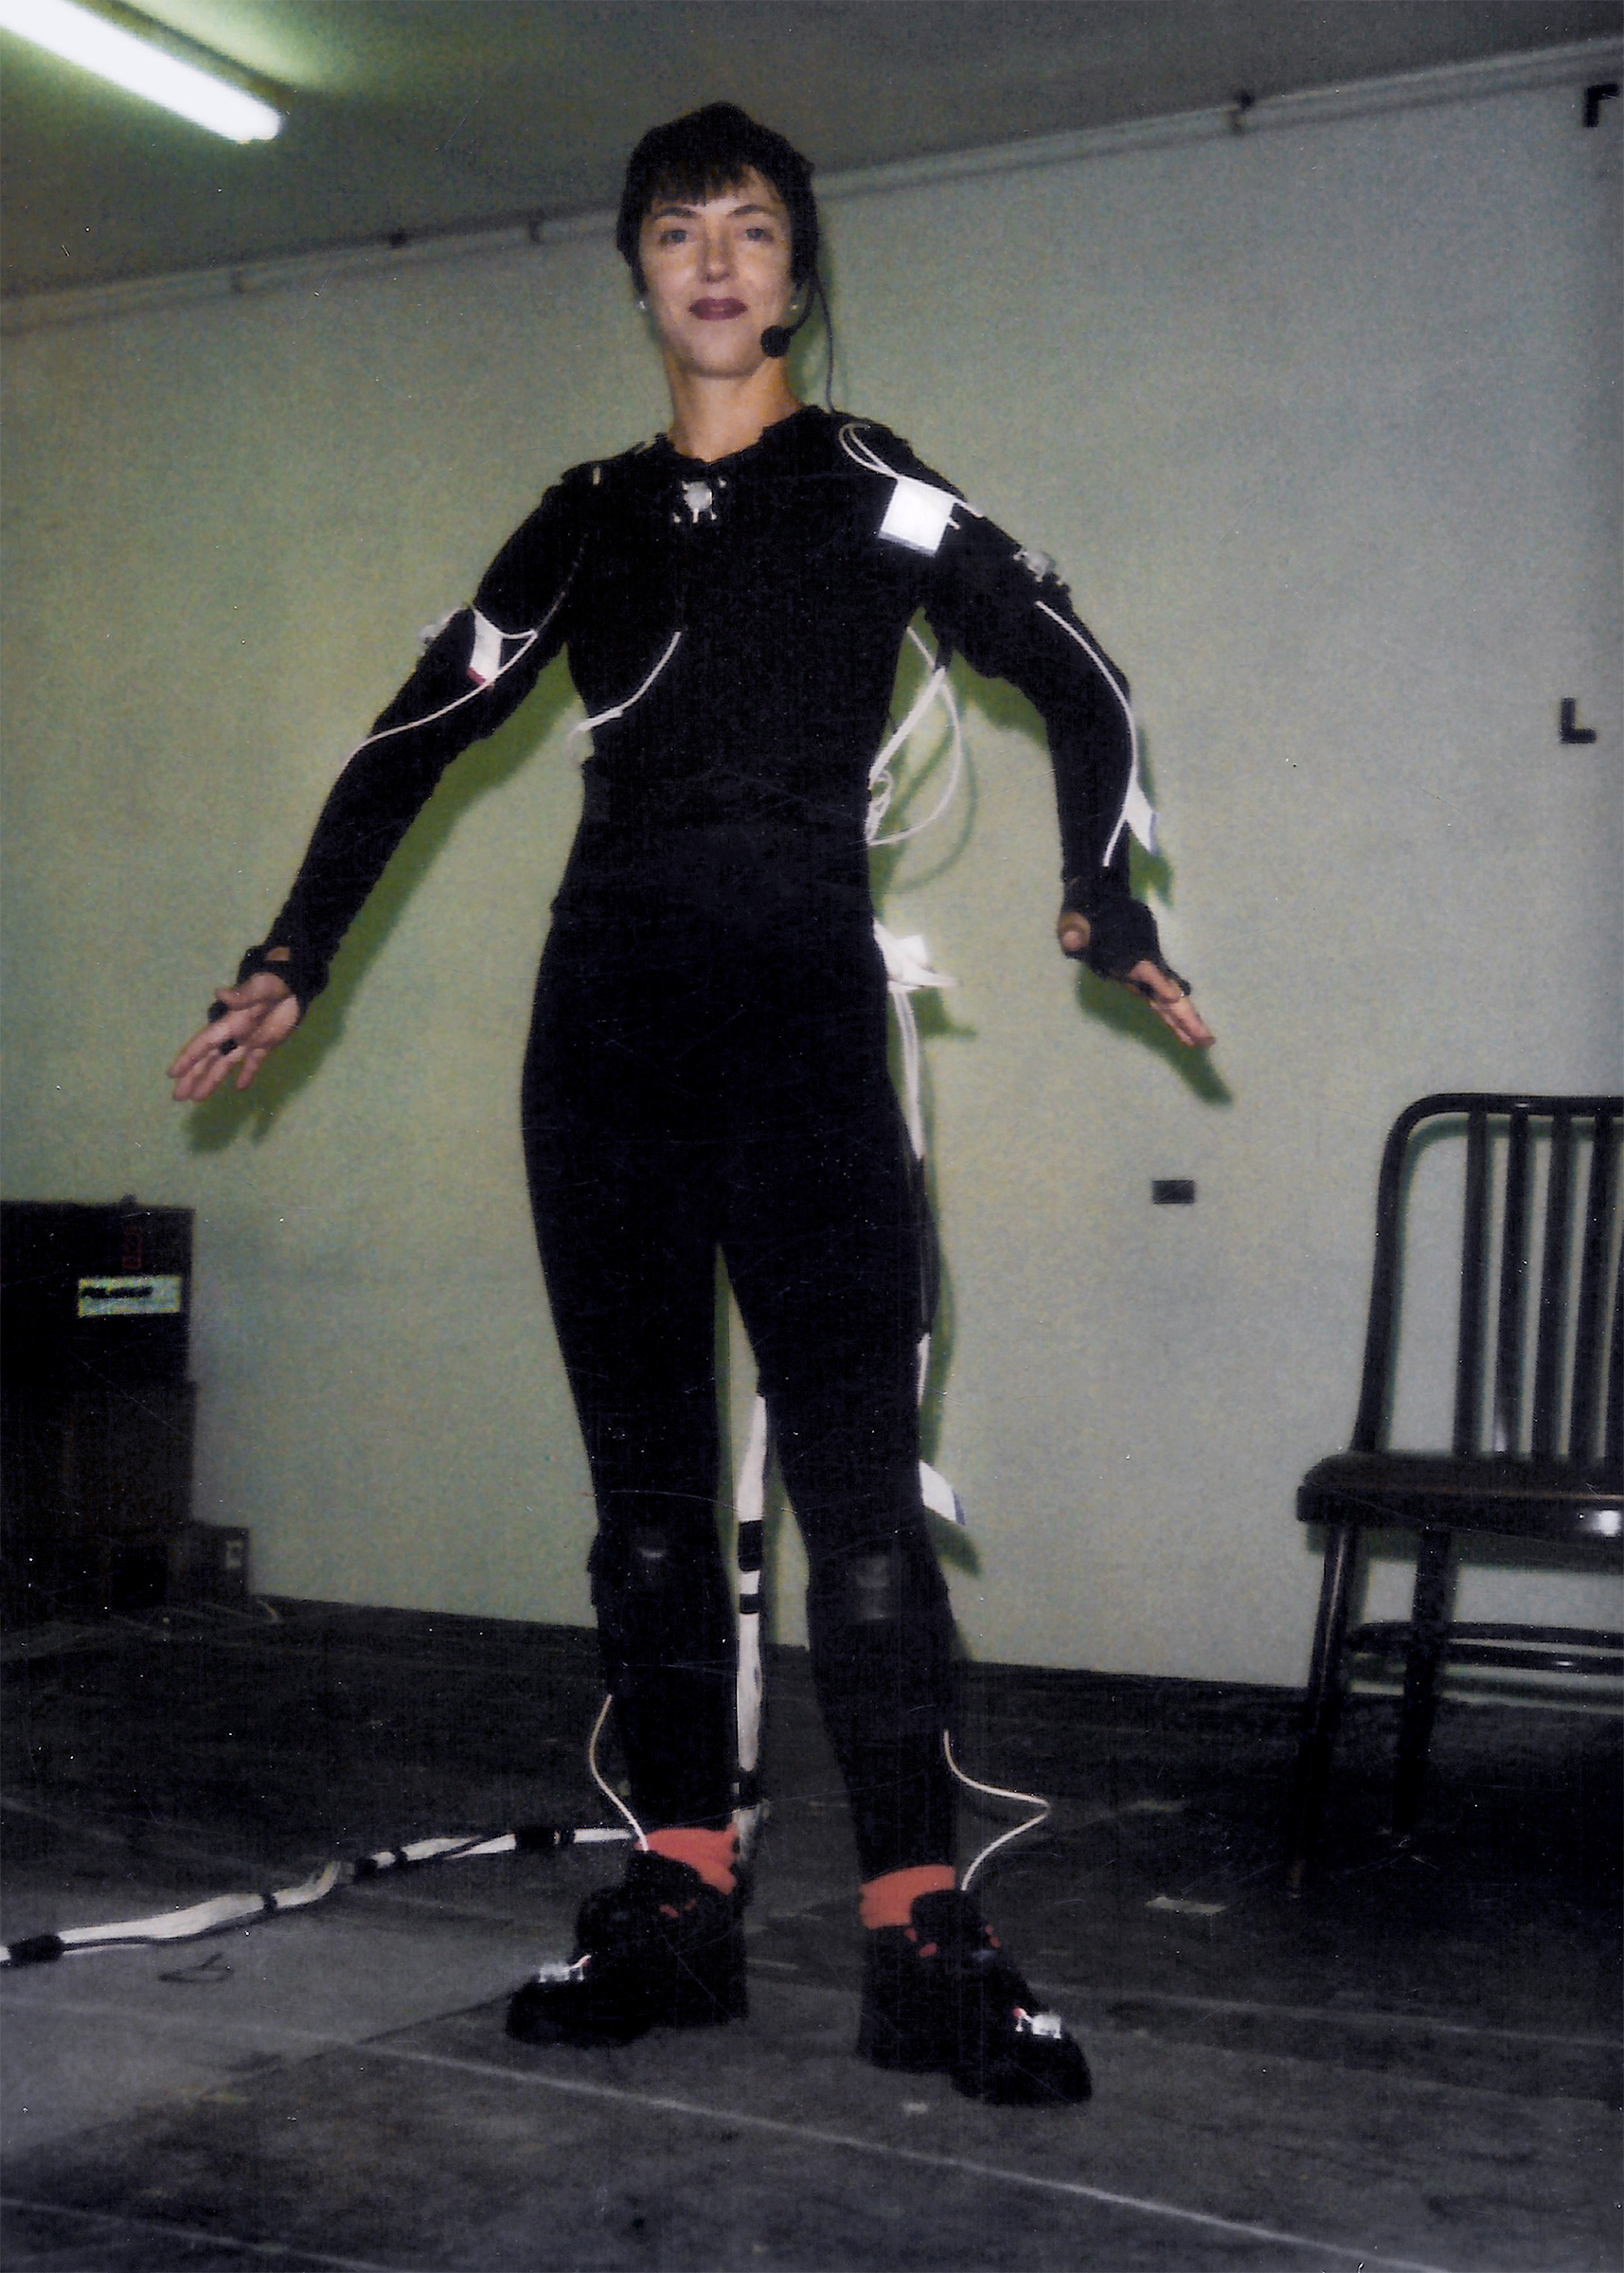 Cathy Sorbo wearing a Motion Capture Harness for controlling MTV's Cathy Sorbet's Spectaculon character.